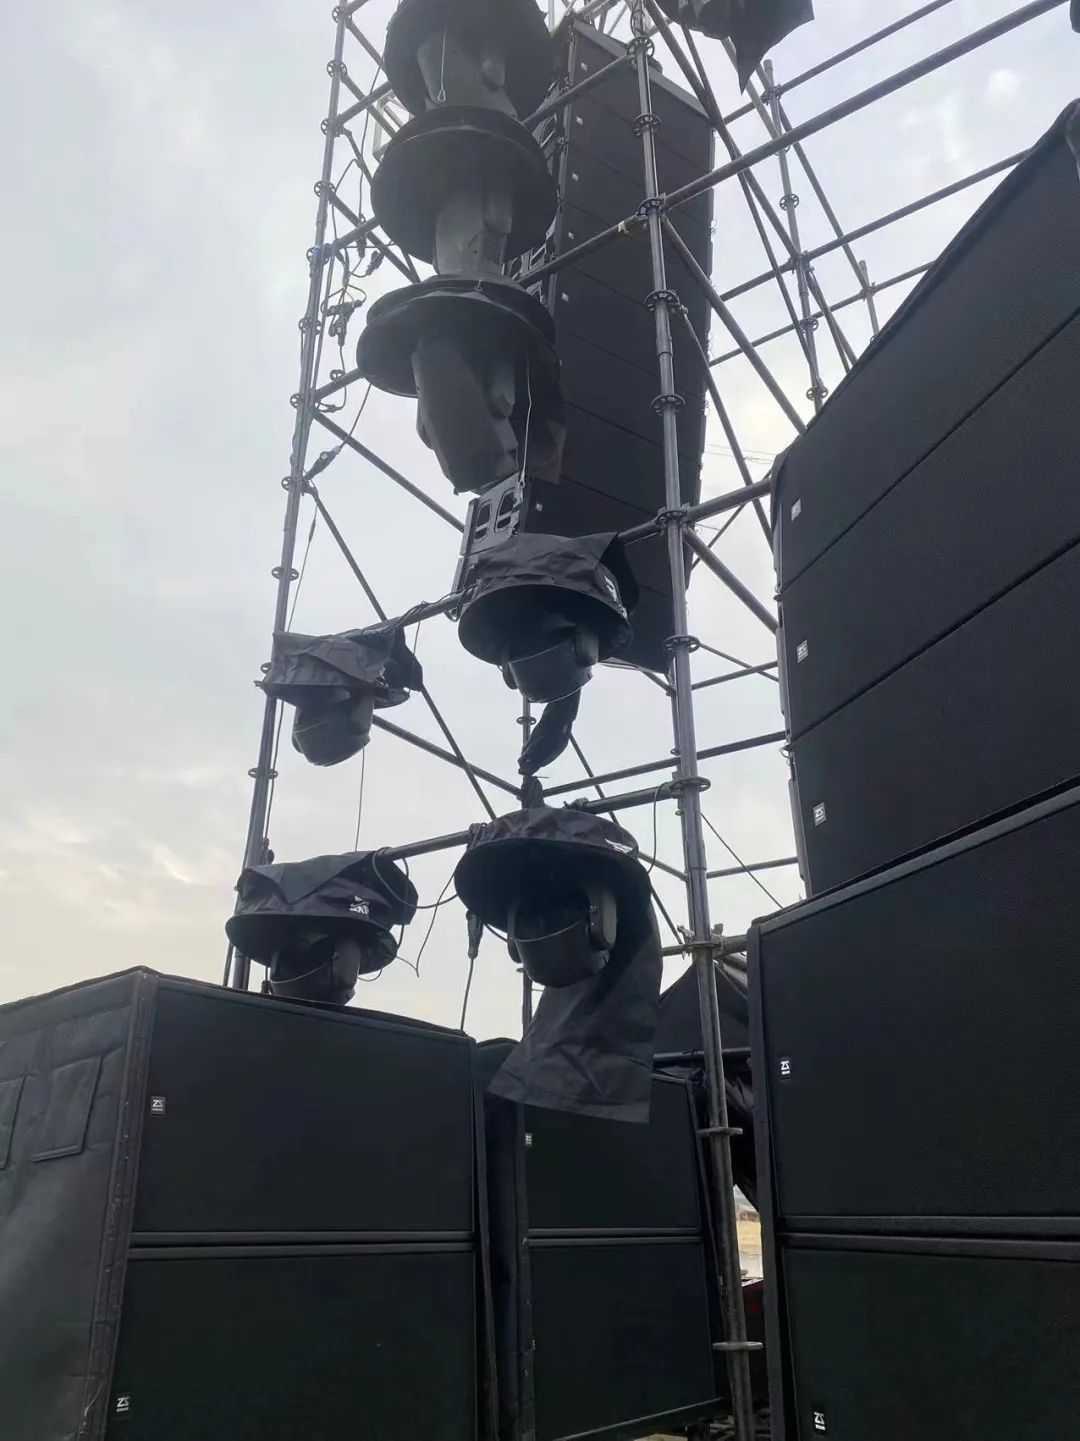 ZSOUND all-weather waterproof line array system!